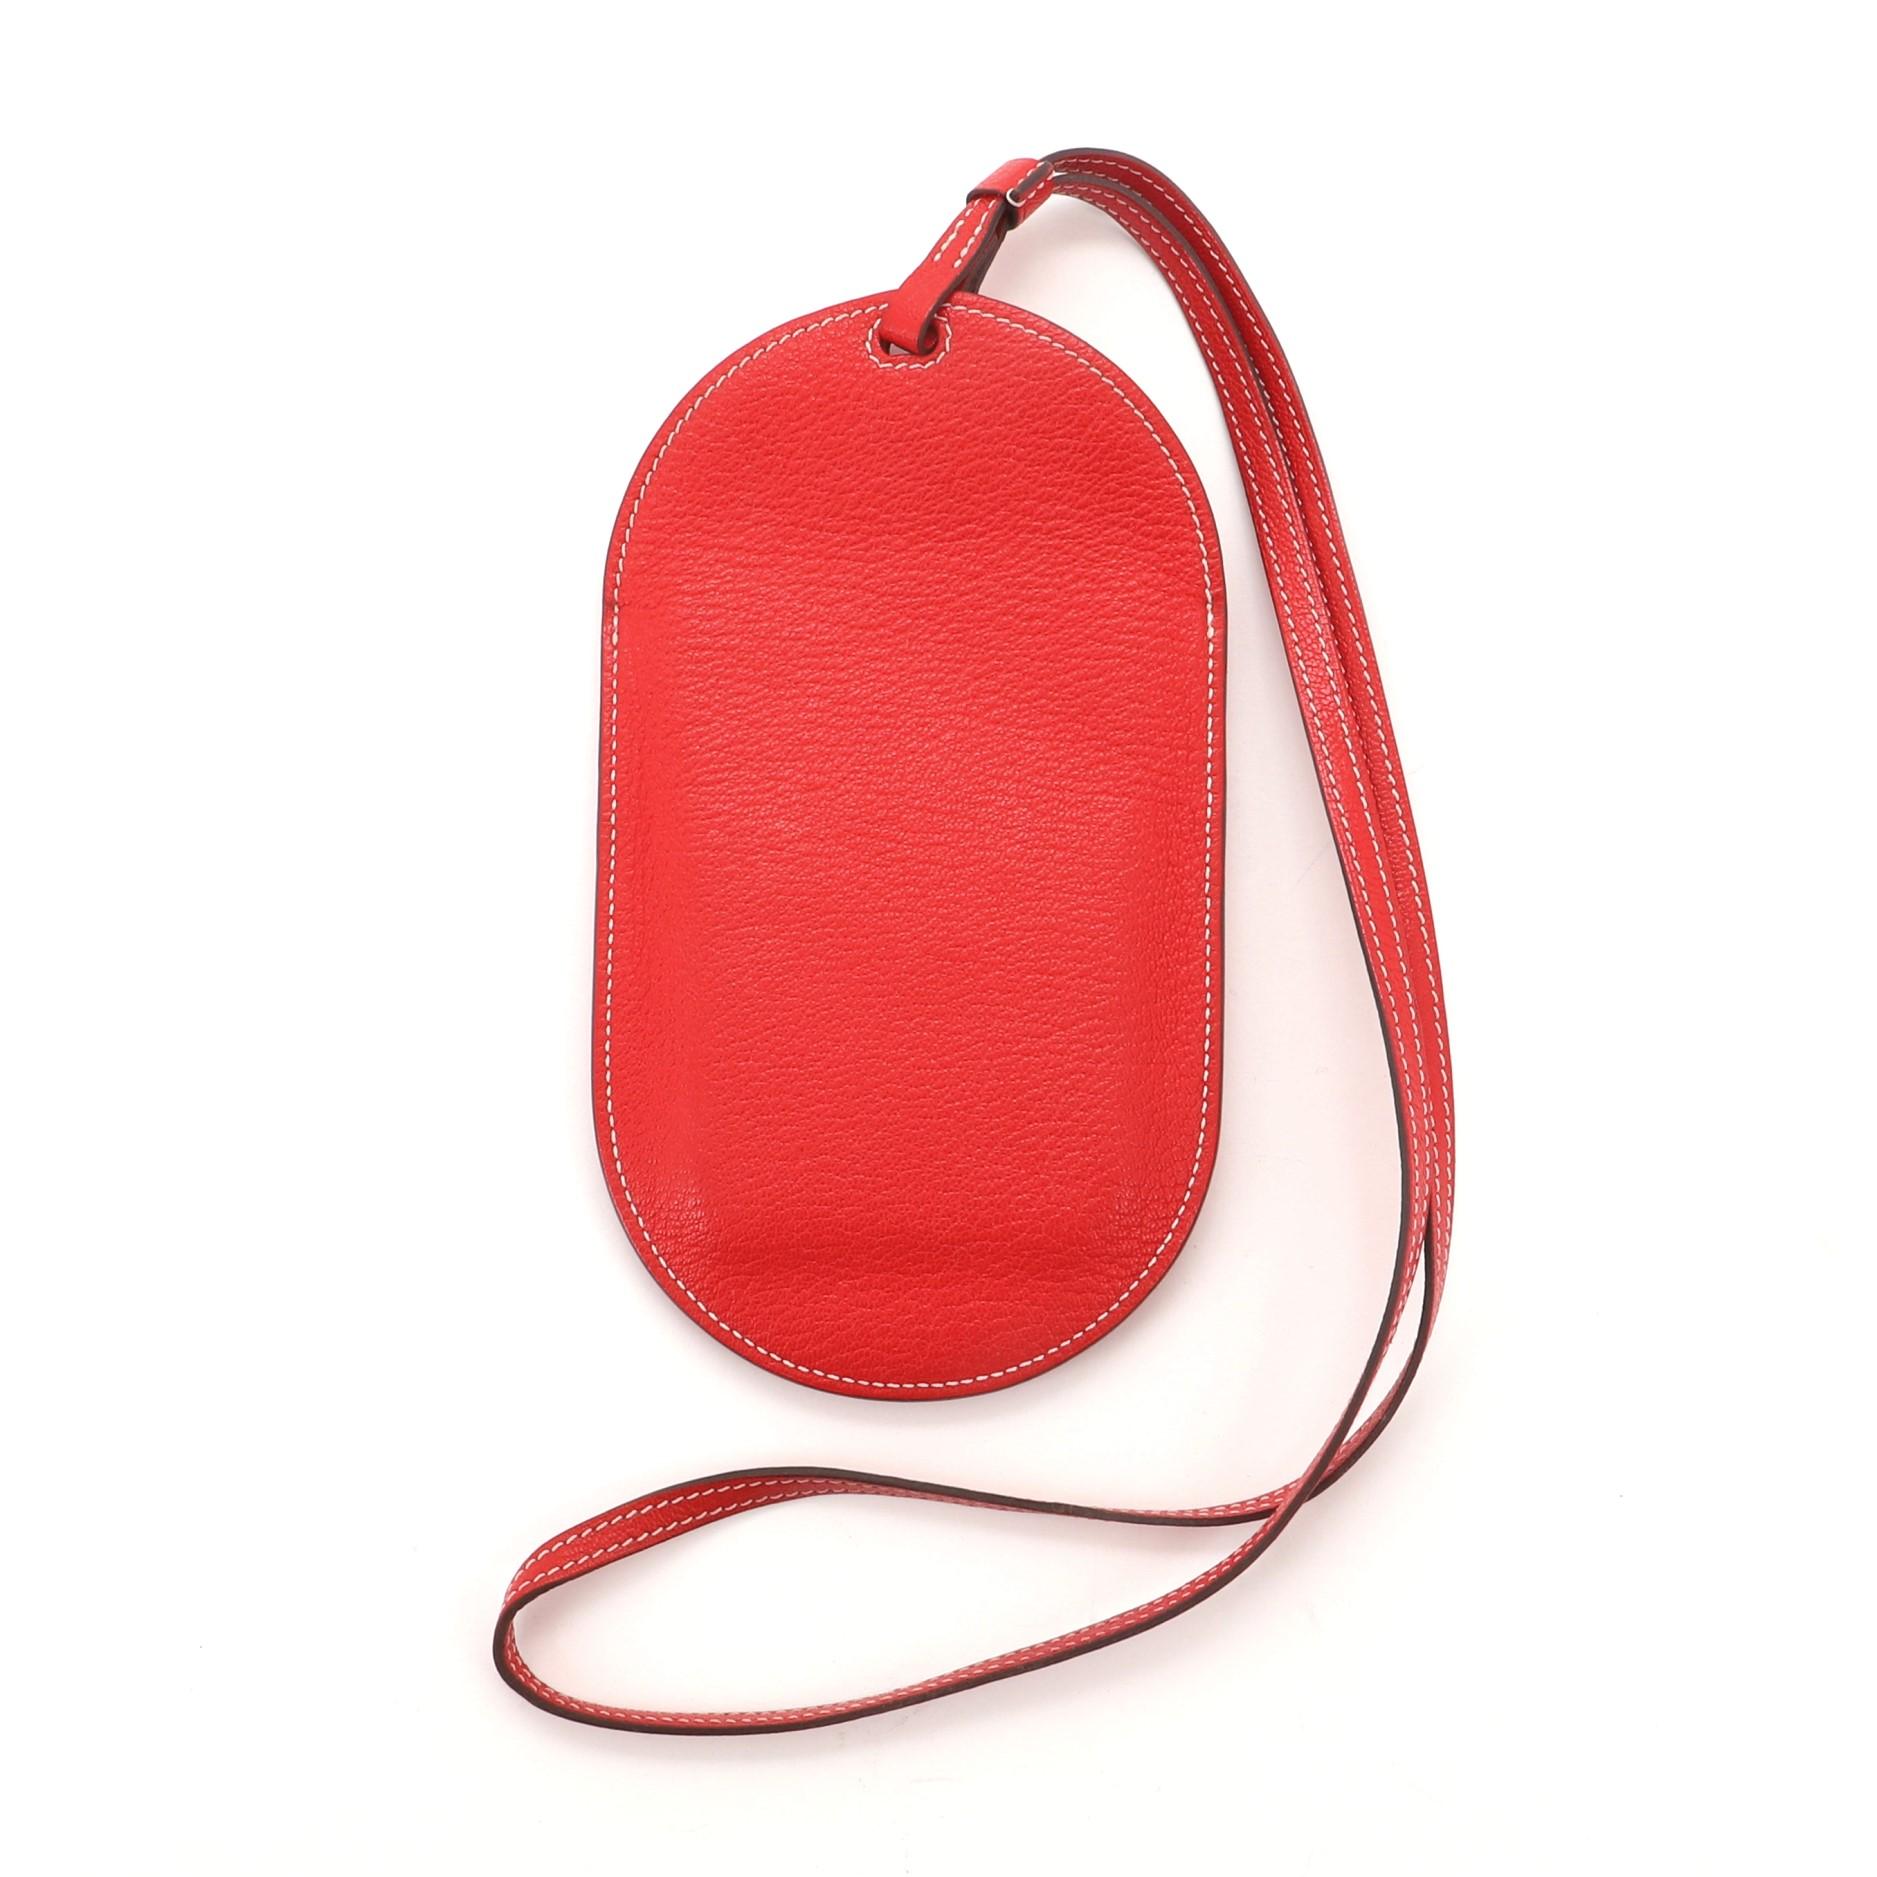 Hermes In-The-Loop Phone To Go Case Leather PM
Red Leather

Condition Details: Peeling and wear on exterior edges, minor wear in interior.

50530MSC

Height 7